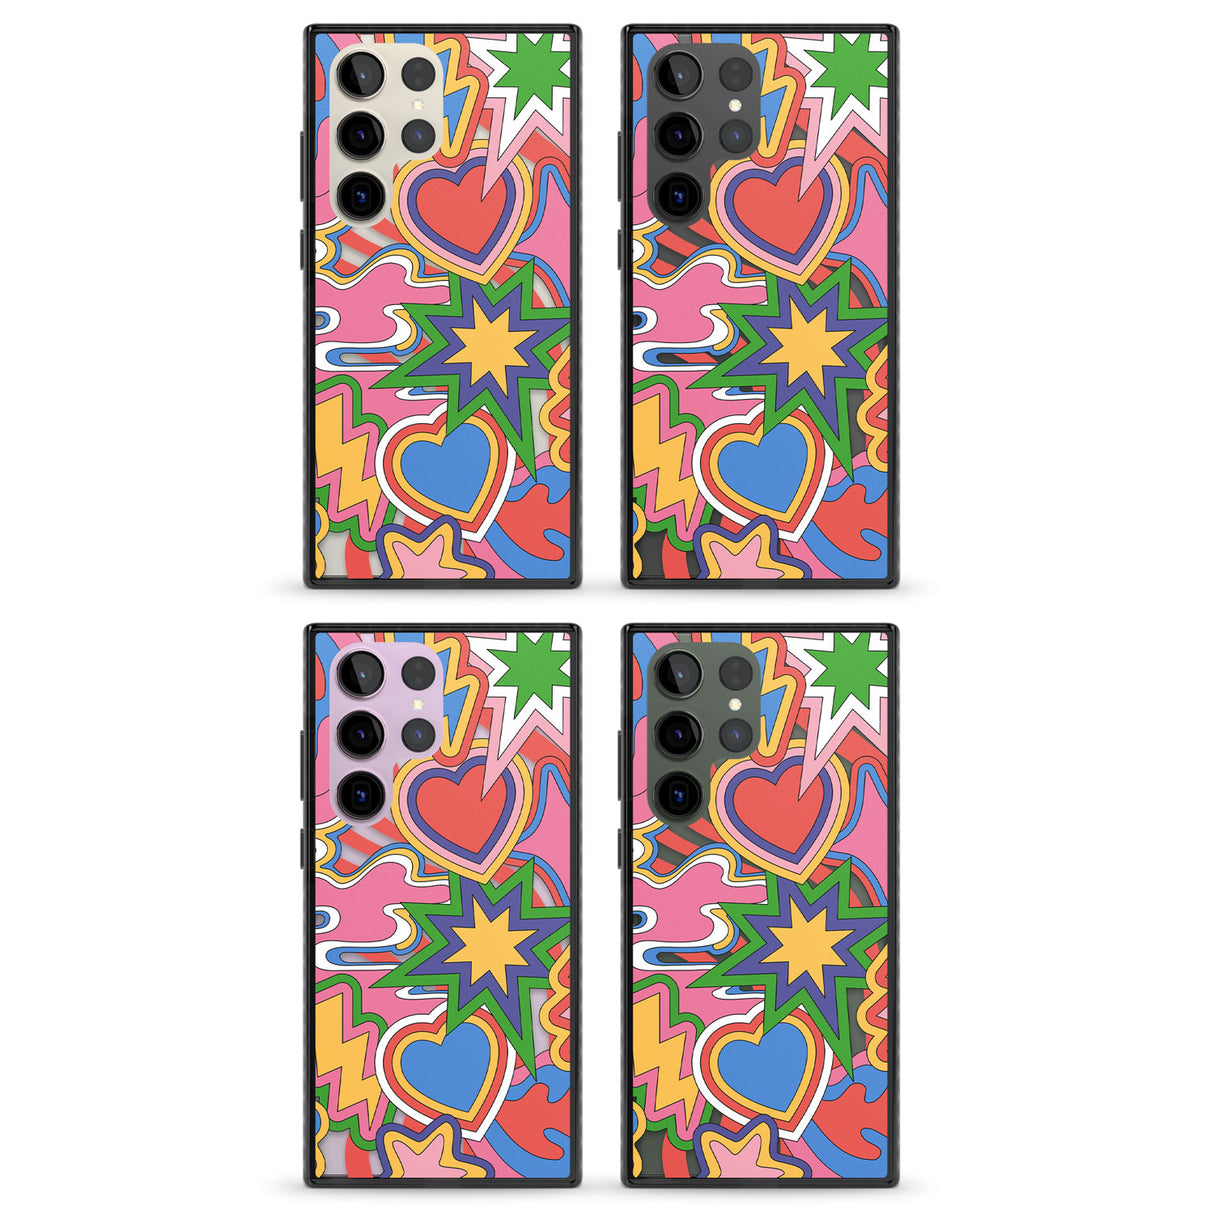 Psychedelic Pop Art Explosion Impact Phone Case for Samsung Galaxy S24 Ultra , Samsung Galaxy S23 Ultra, Samsung Galaxy S22 Ultra